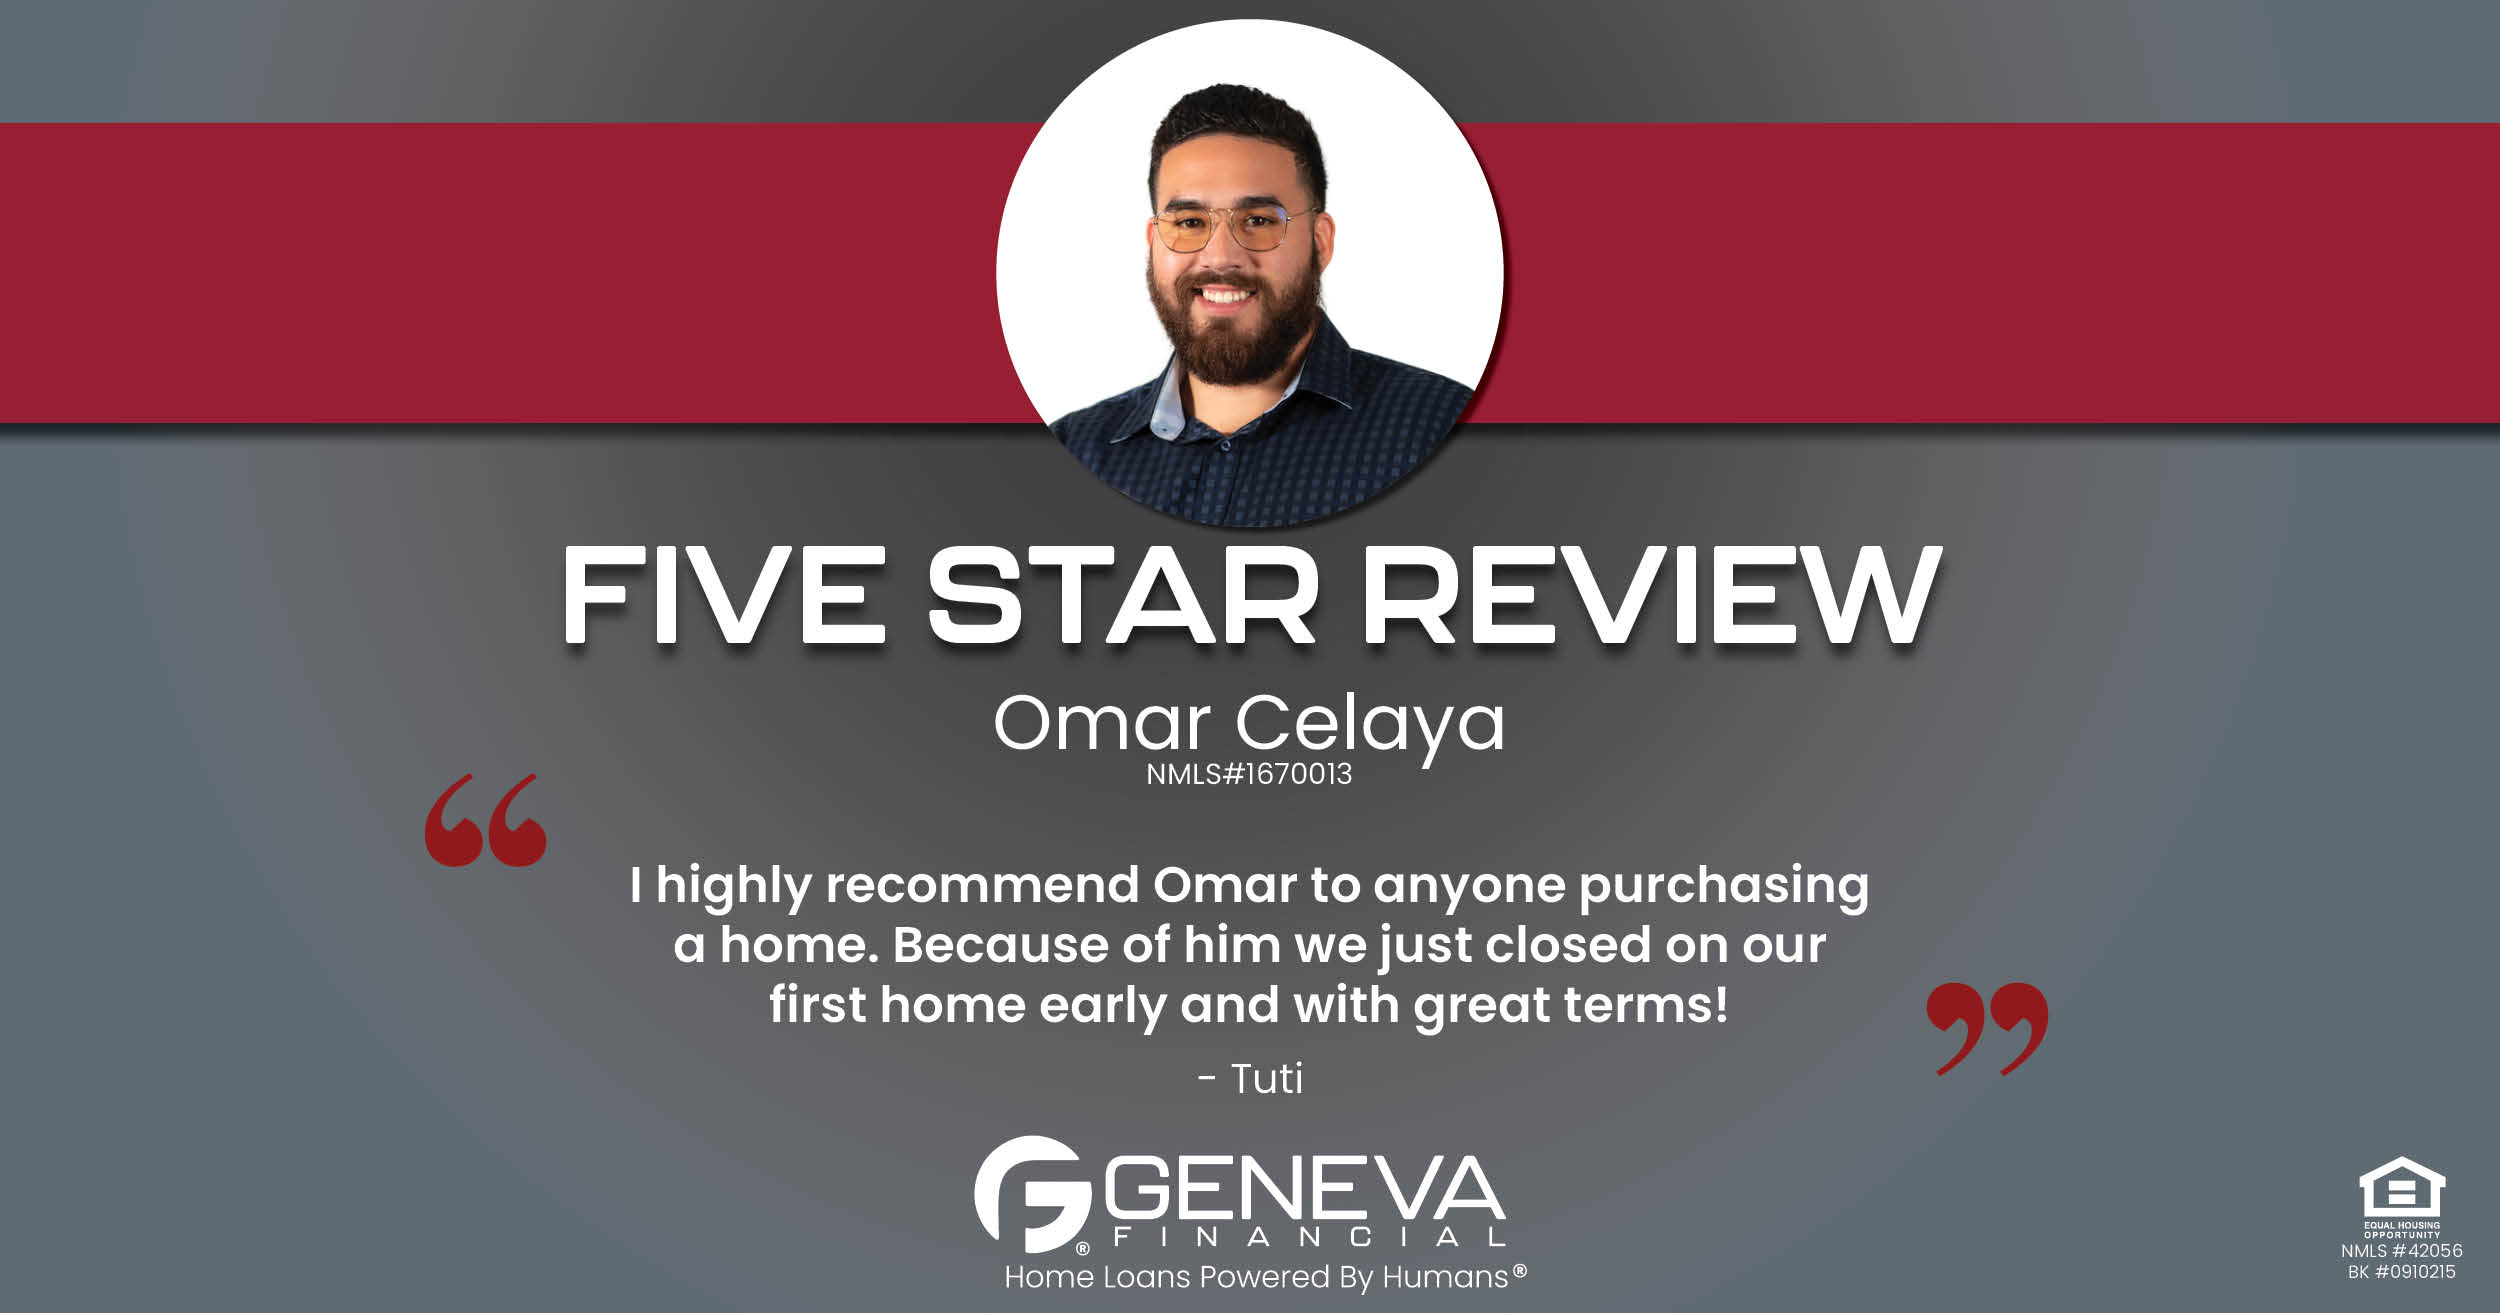 5 Star Review for Omar Celaya, Licensed Mortgage Loan Officer with Geneva Financial, Yuma, AZ – Home Loans Powered by Humans®.